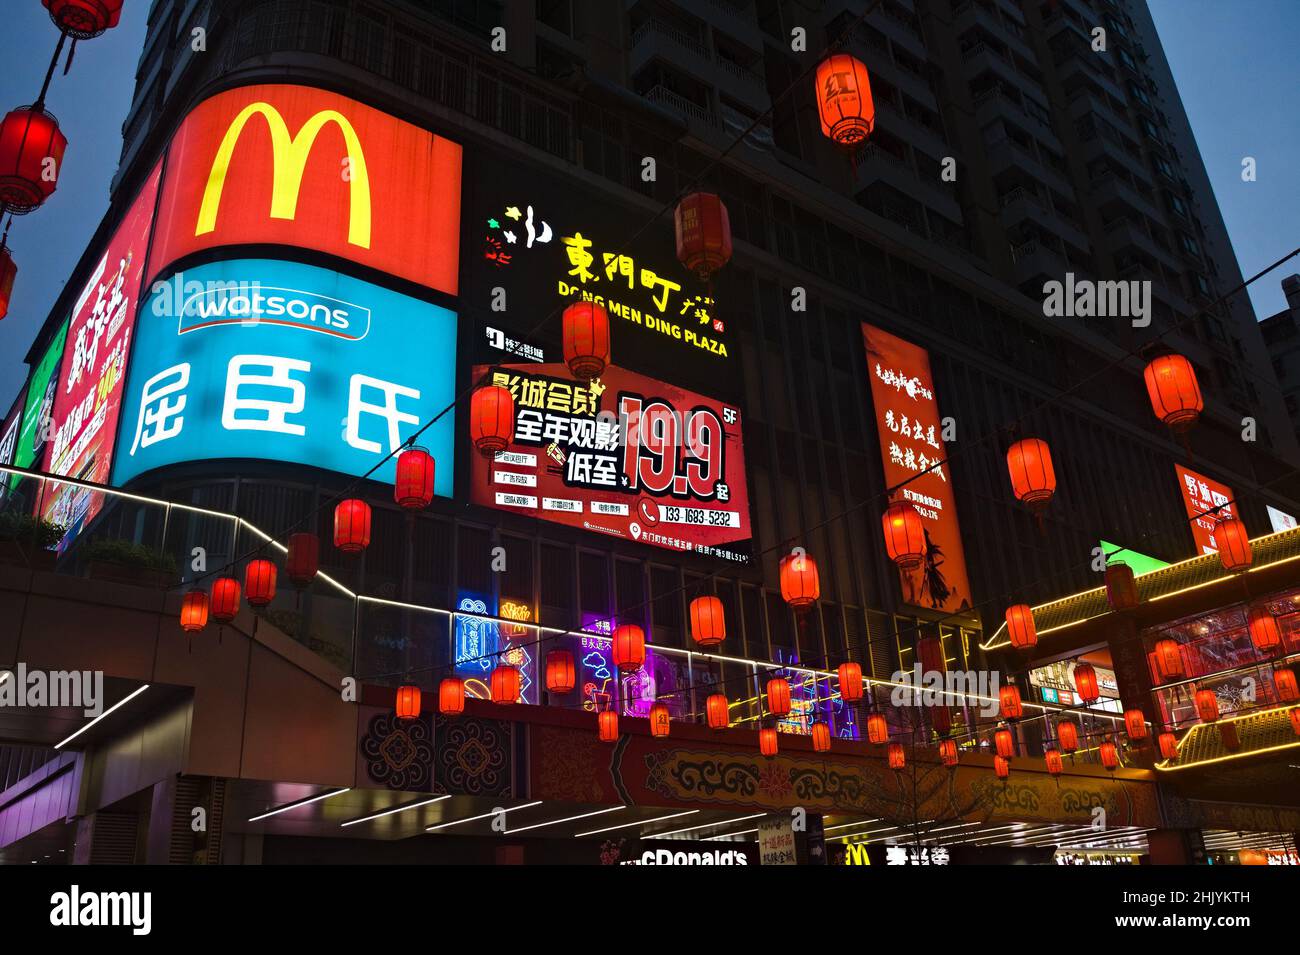 Big McDonald's logo prominently shown on side of building in Shenzhen, China Stock Photo